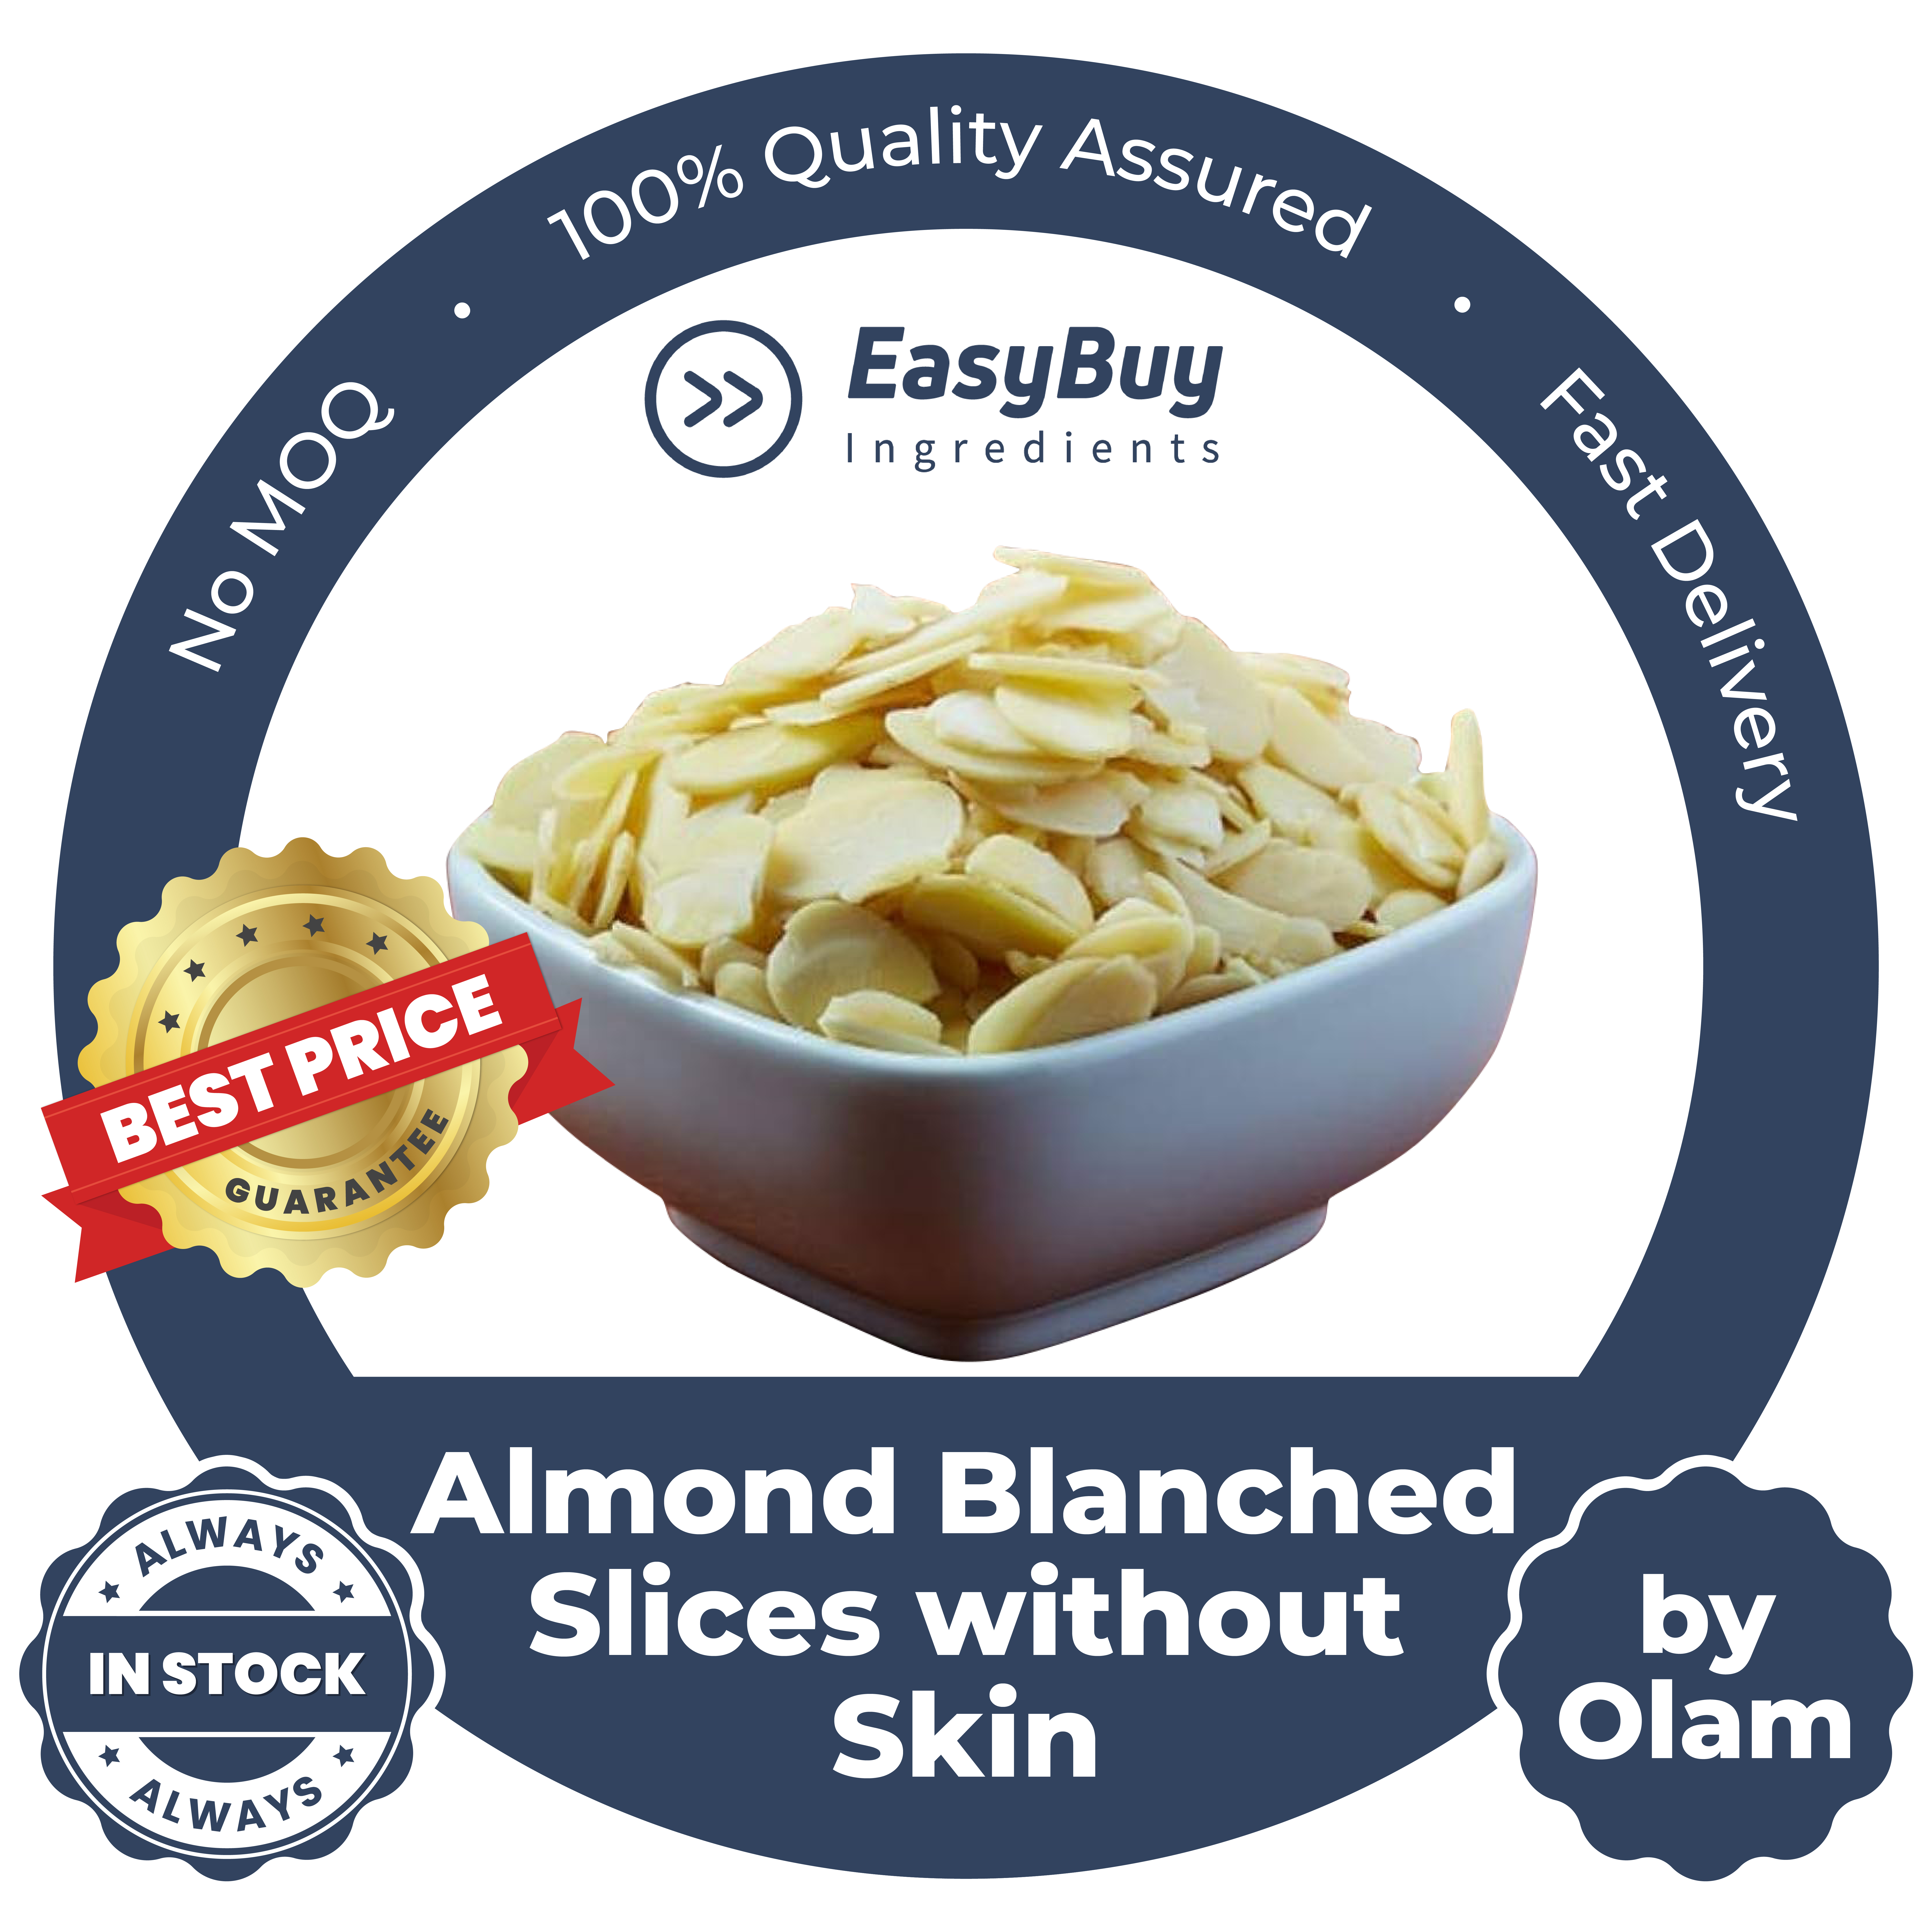 Almond Blanched slices without Skin by Olam